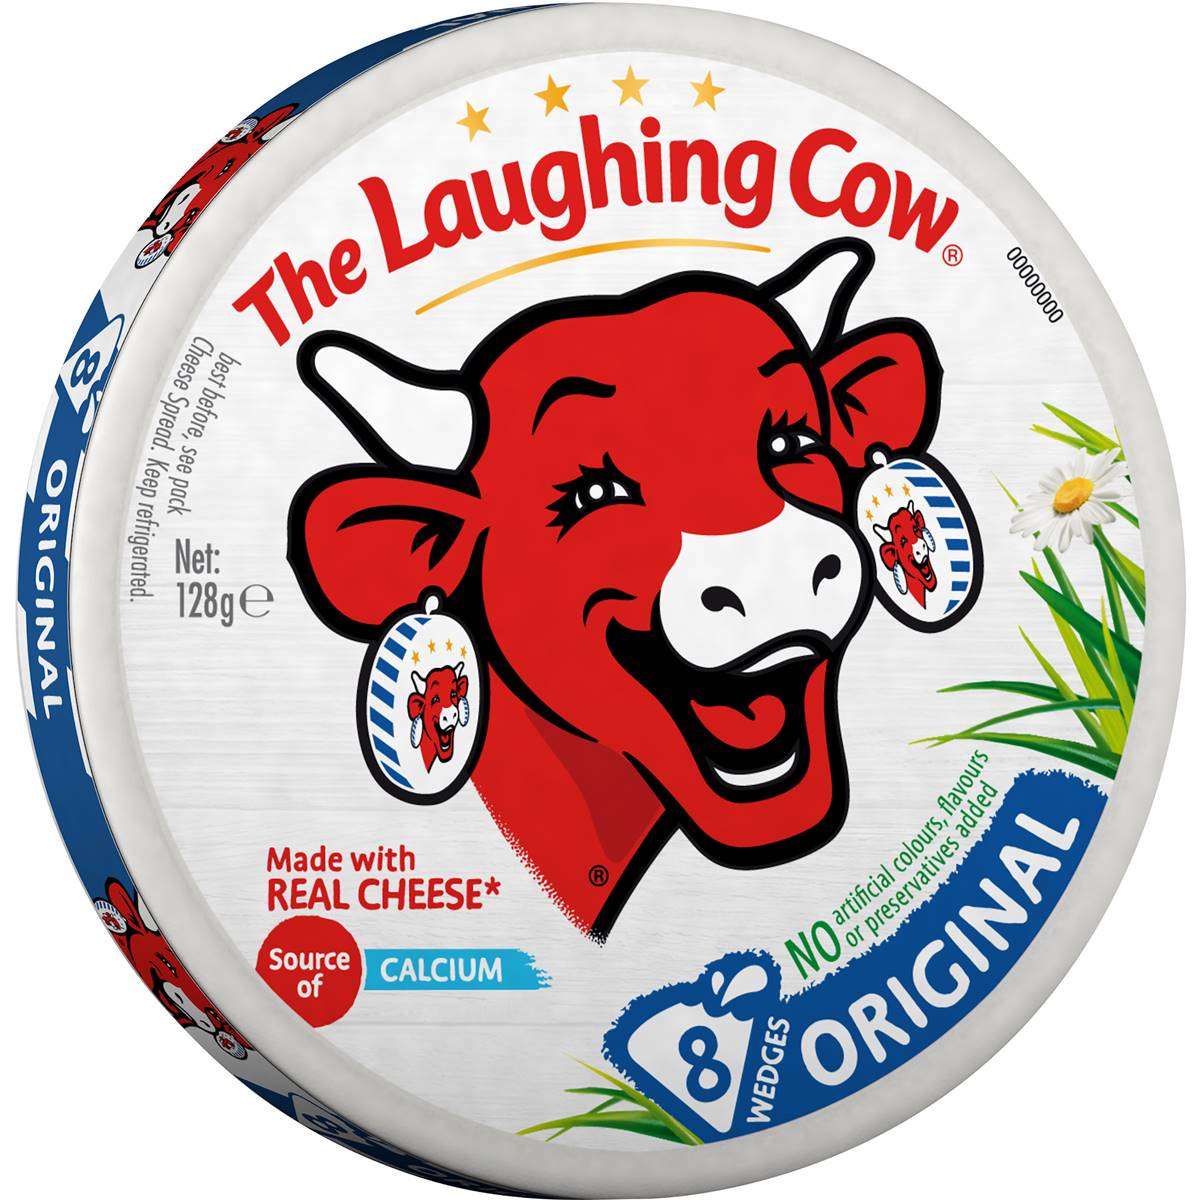 Calories in Laughing Cow Cheese Original.